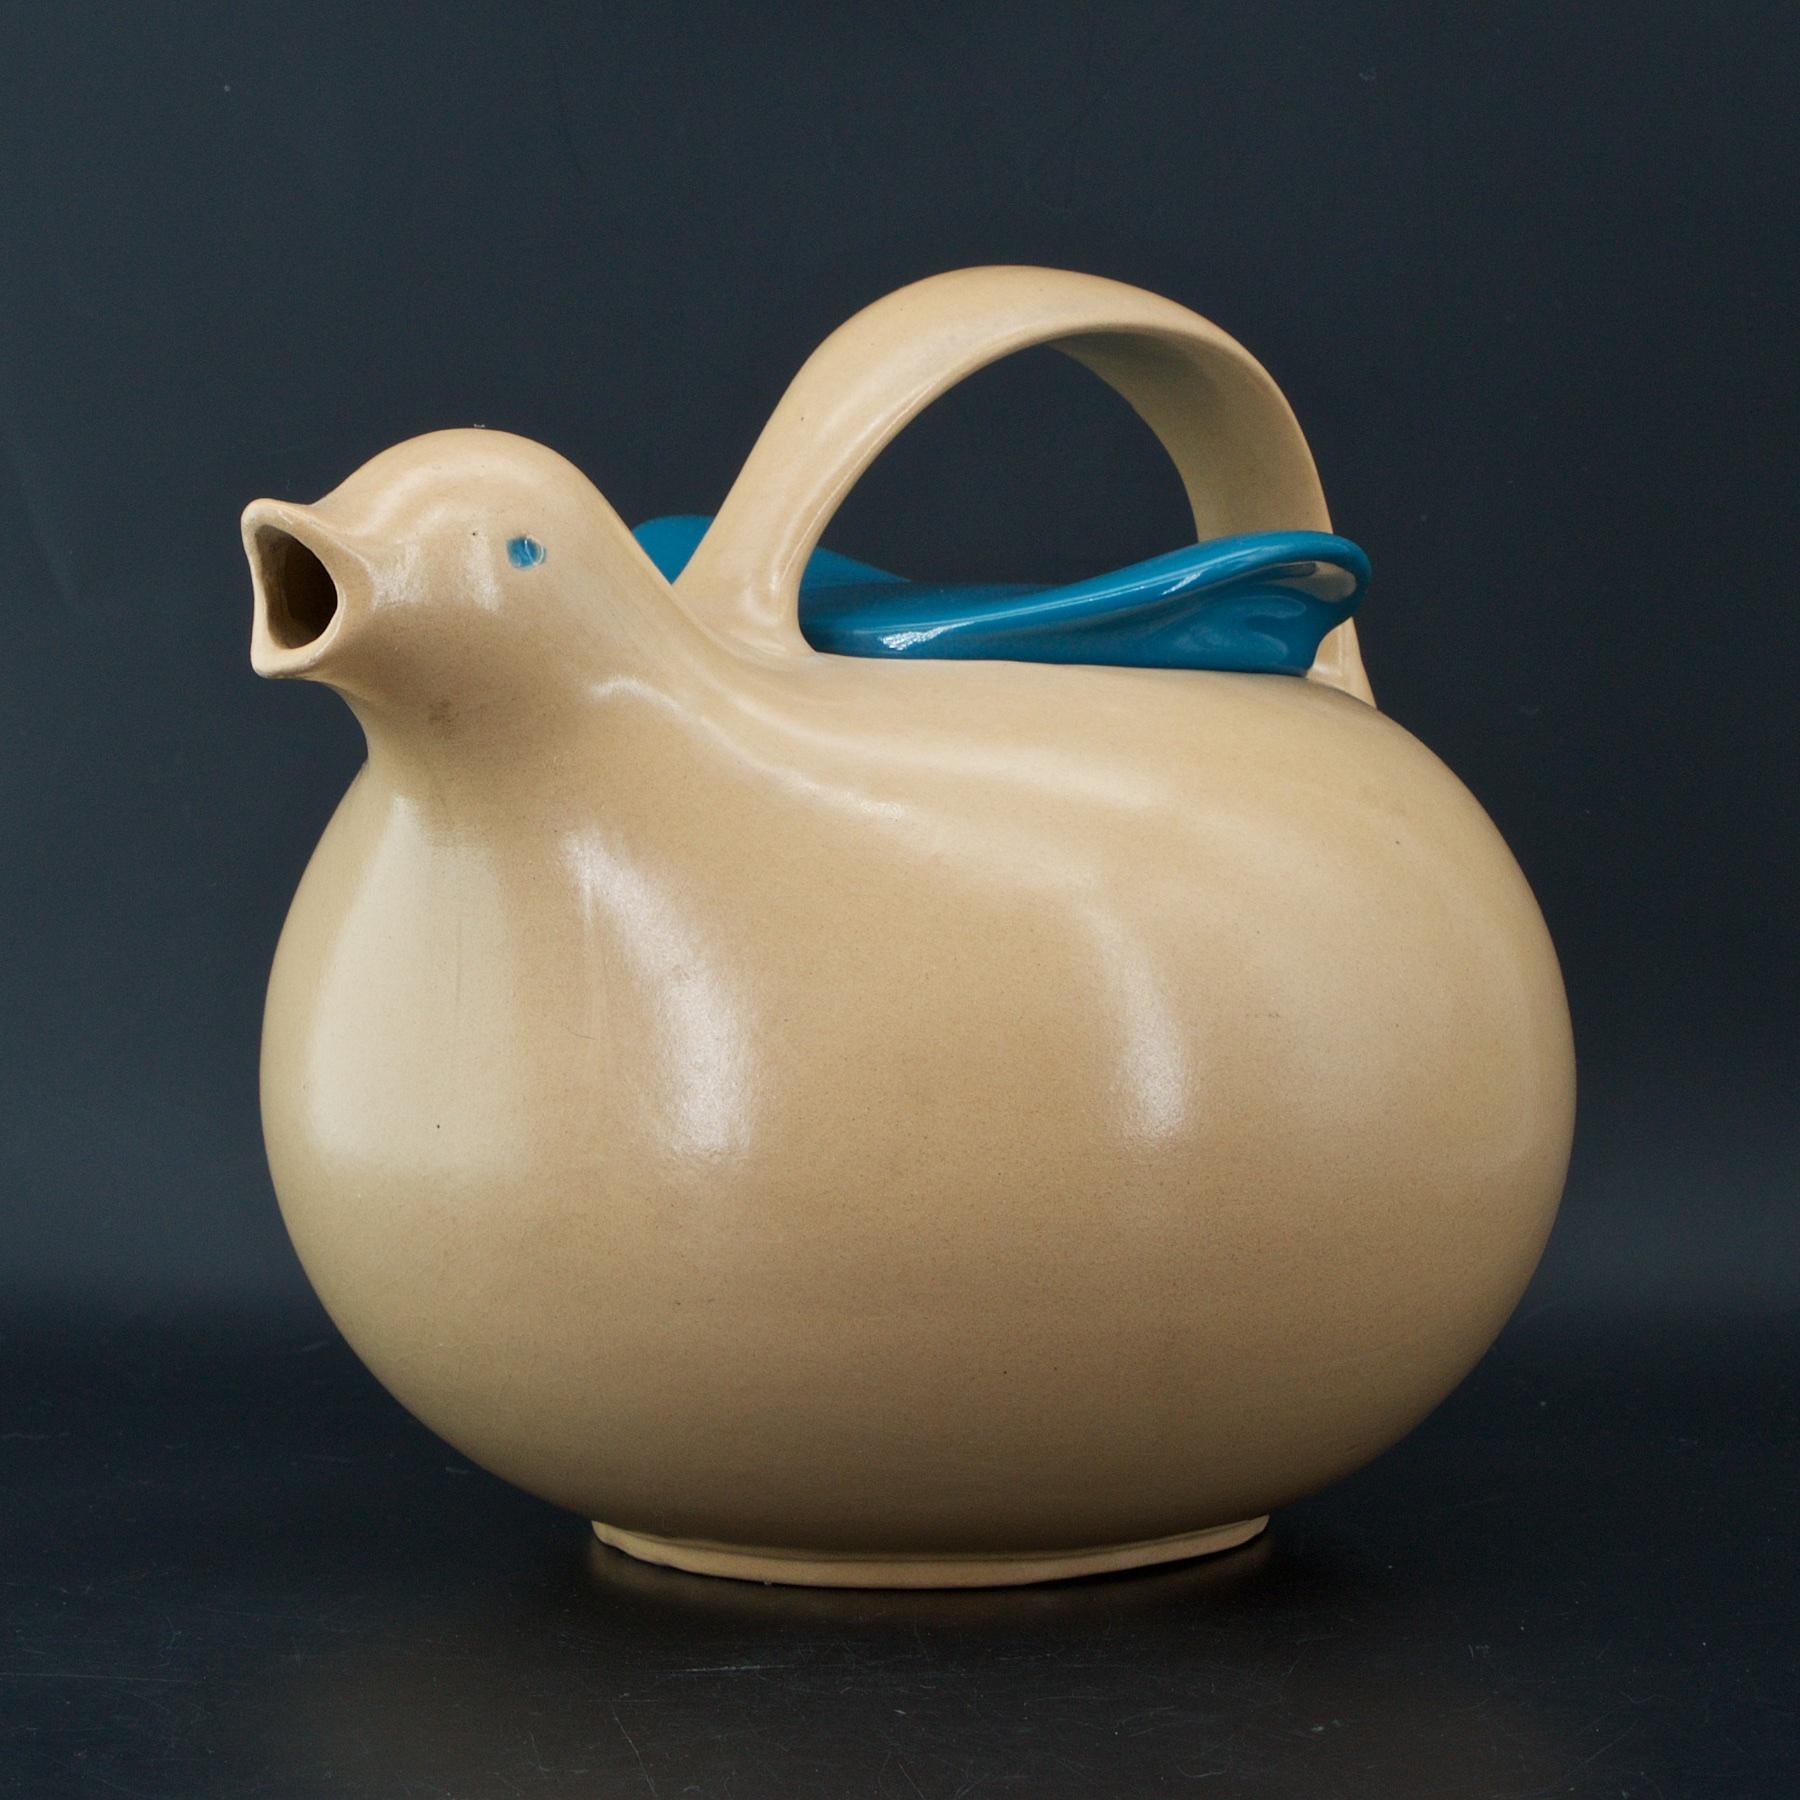 Early design, whimsical! A bird-form teapot with winged lid, Monmouth Pottery, via Pine Stoneware or Western Stoneware Company in Monmouth, Illinois. c.1953/1954. Unmarked. Reference; Scott Vermillion, “Eva Zeisel Stoneware and Ironstone.” in Eva